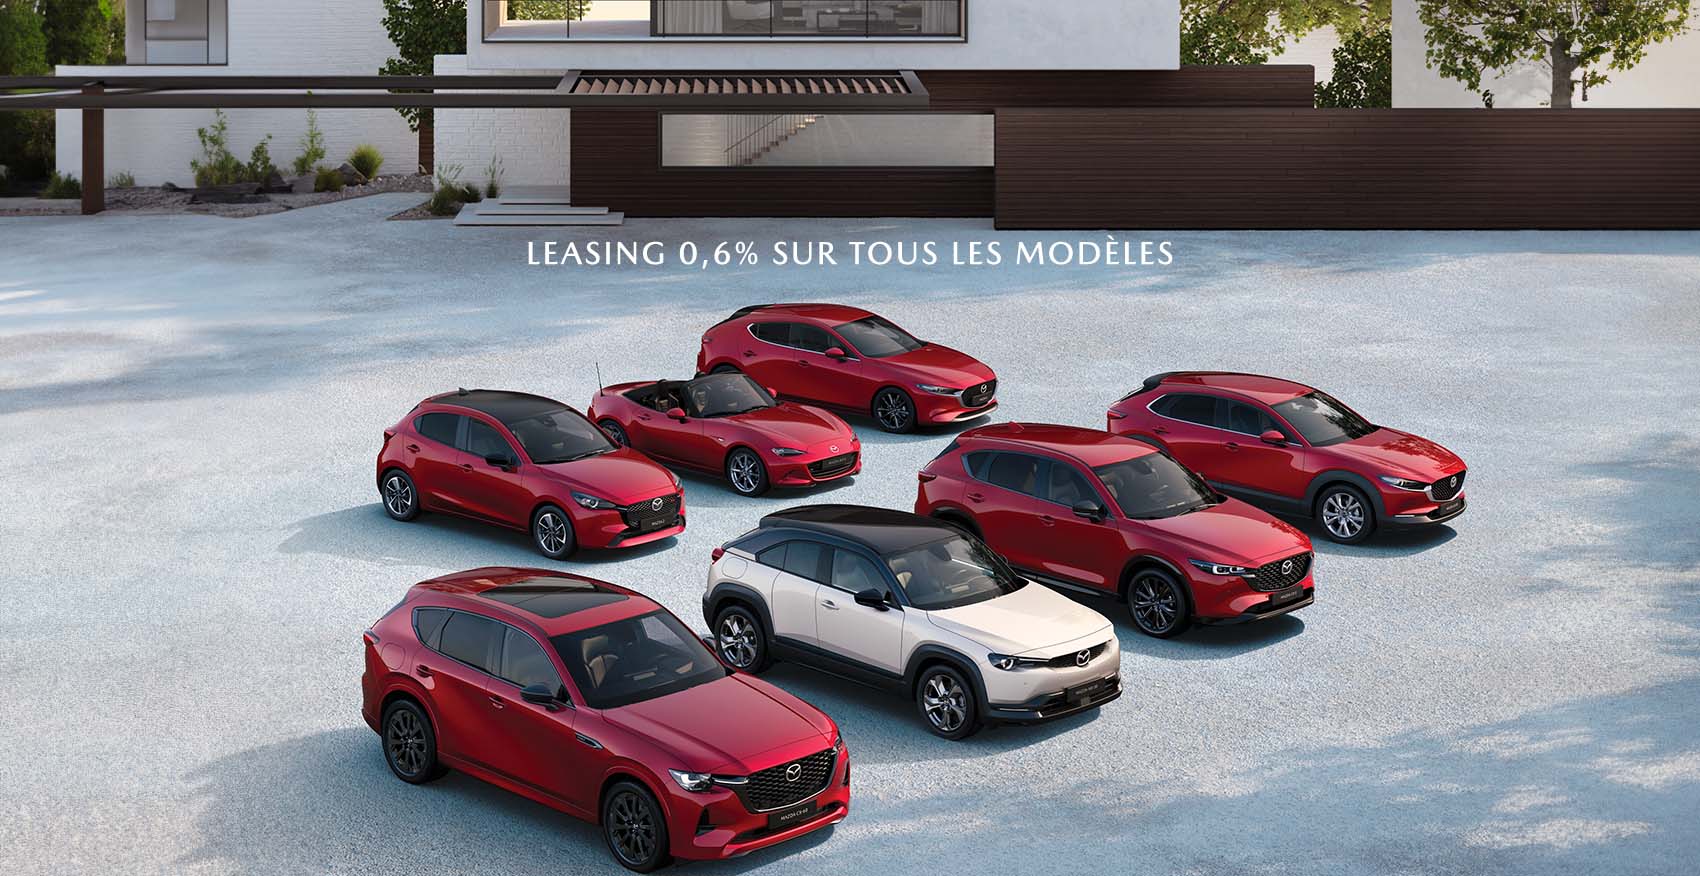 OFFRE_Mazda-Leasing0.6%